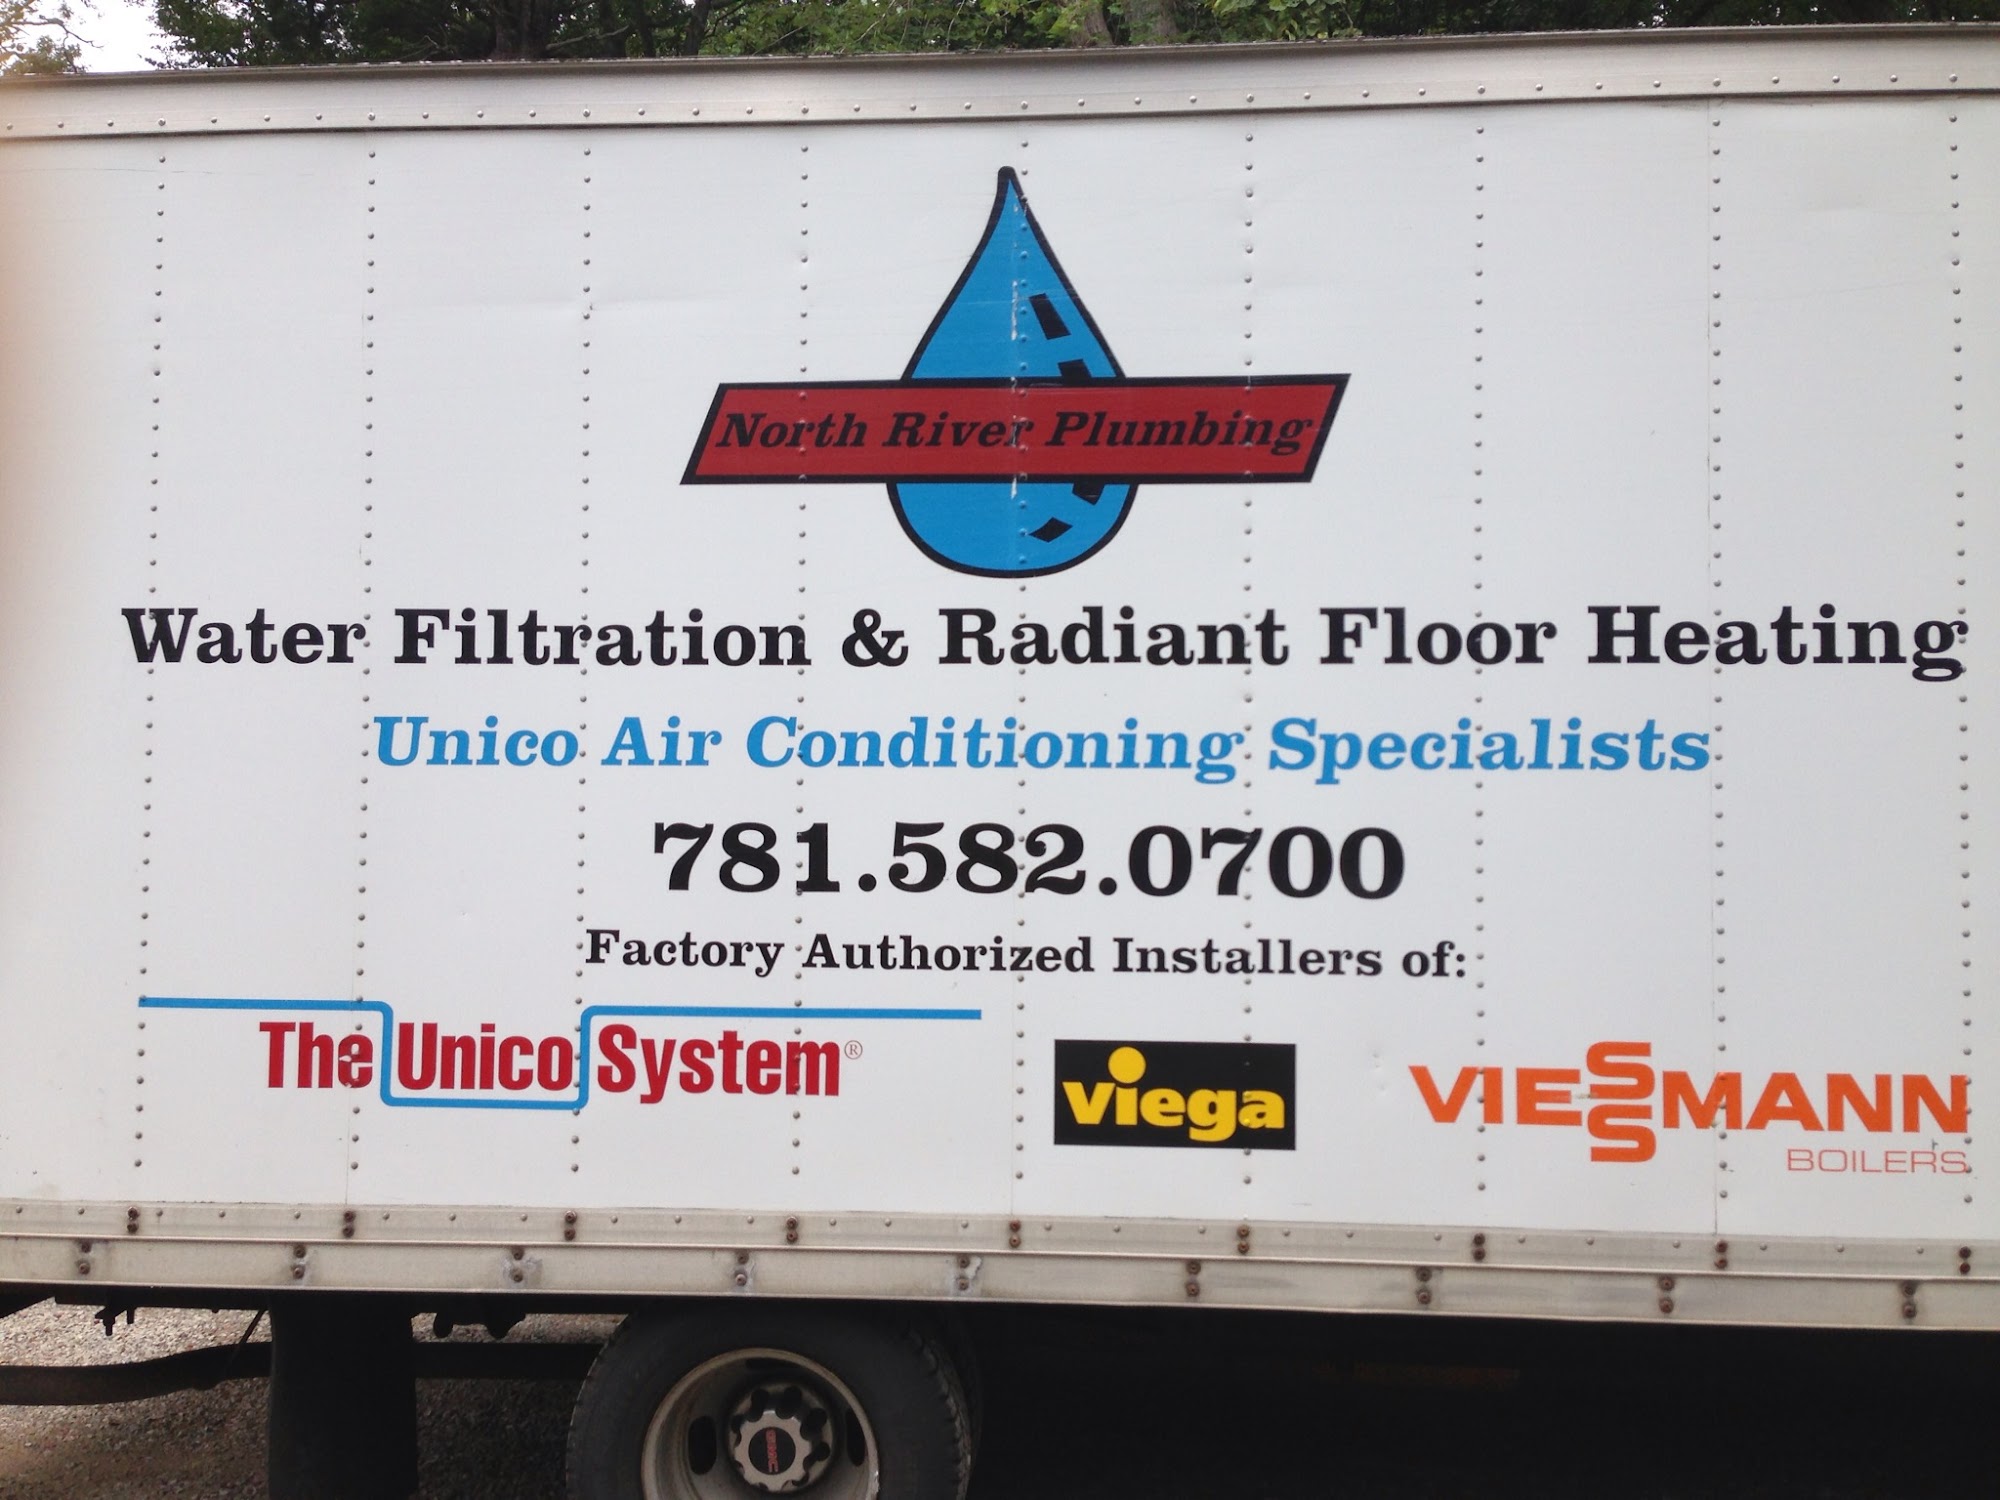 North River Plumbing & Water Filtration Co.